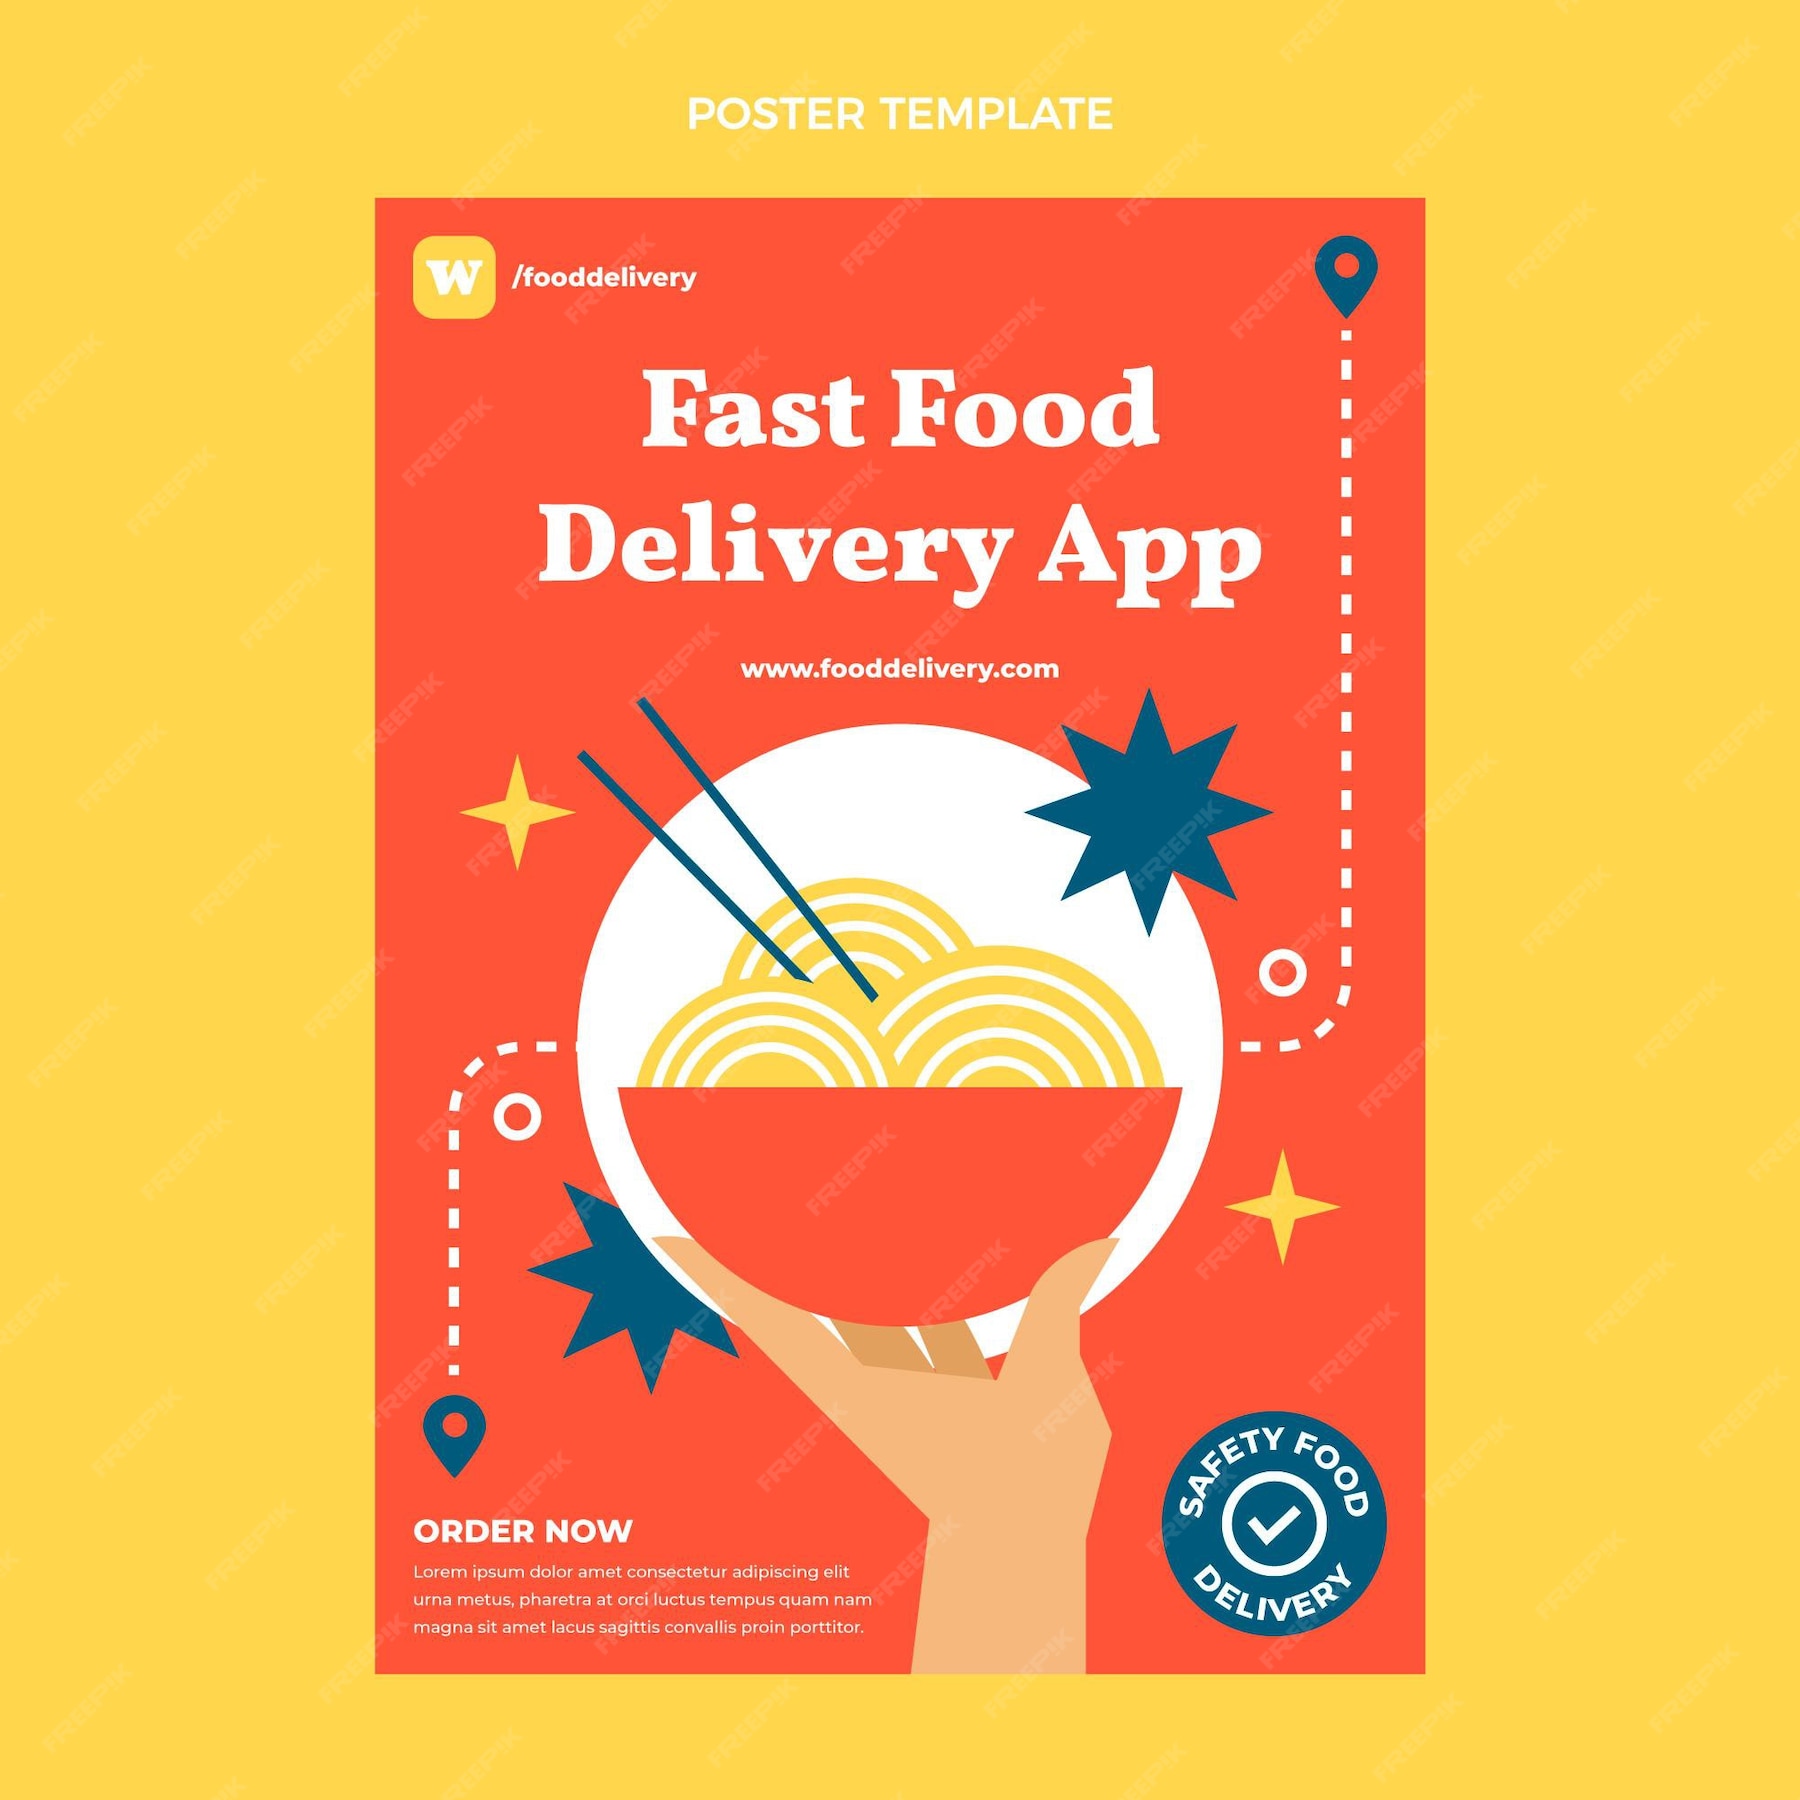 free-vector-flat-food-poster-template